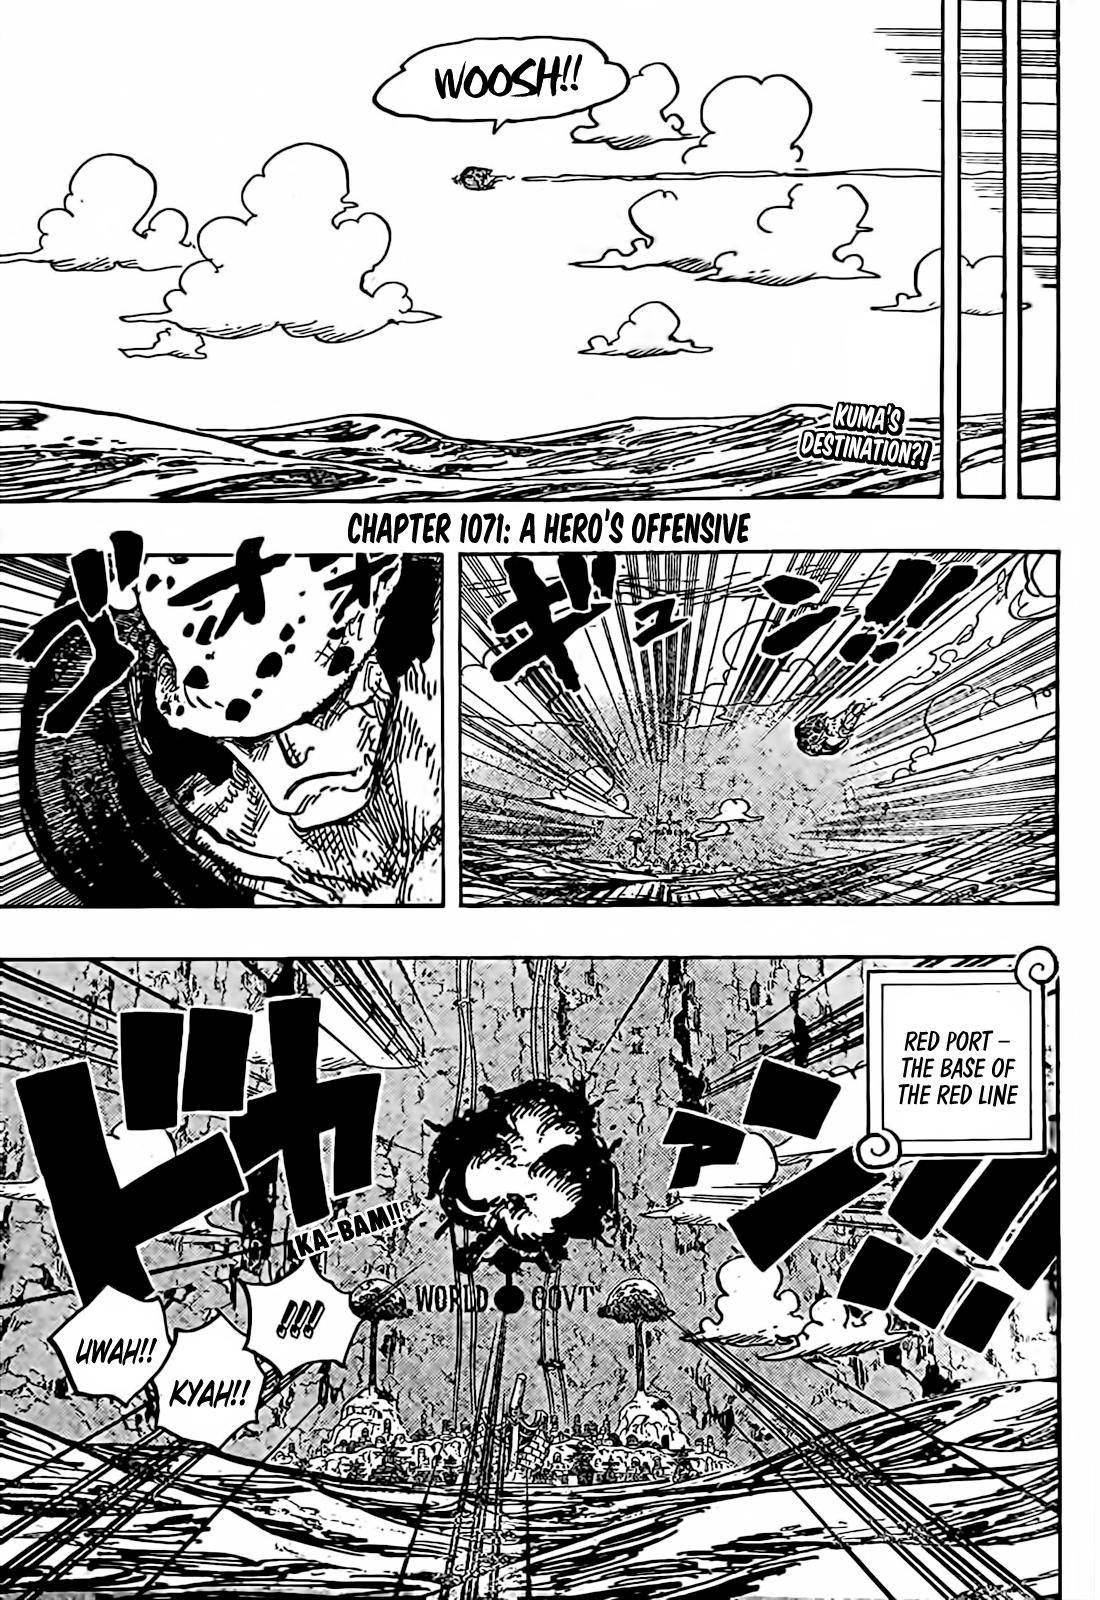 Read One Piece Chapter 1071 0